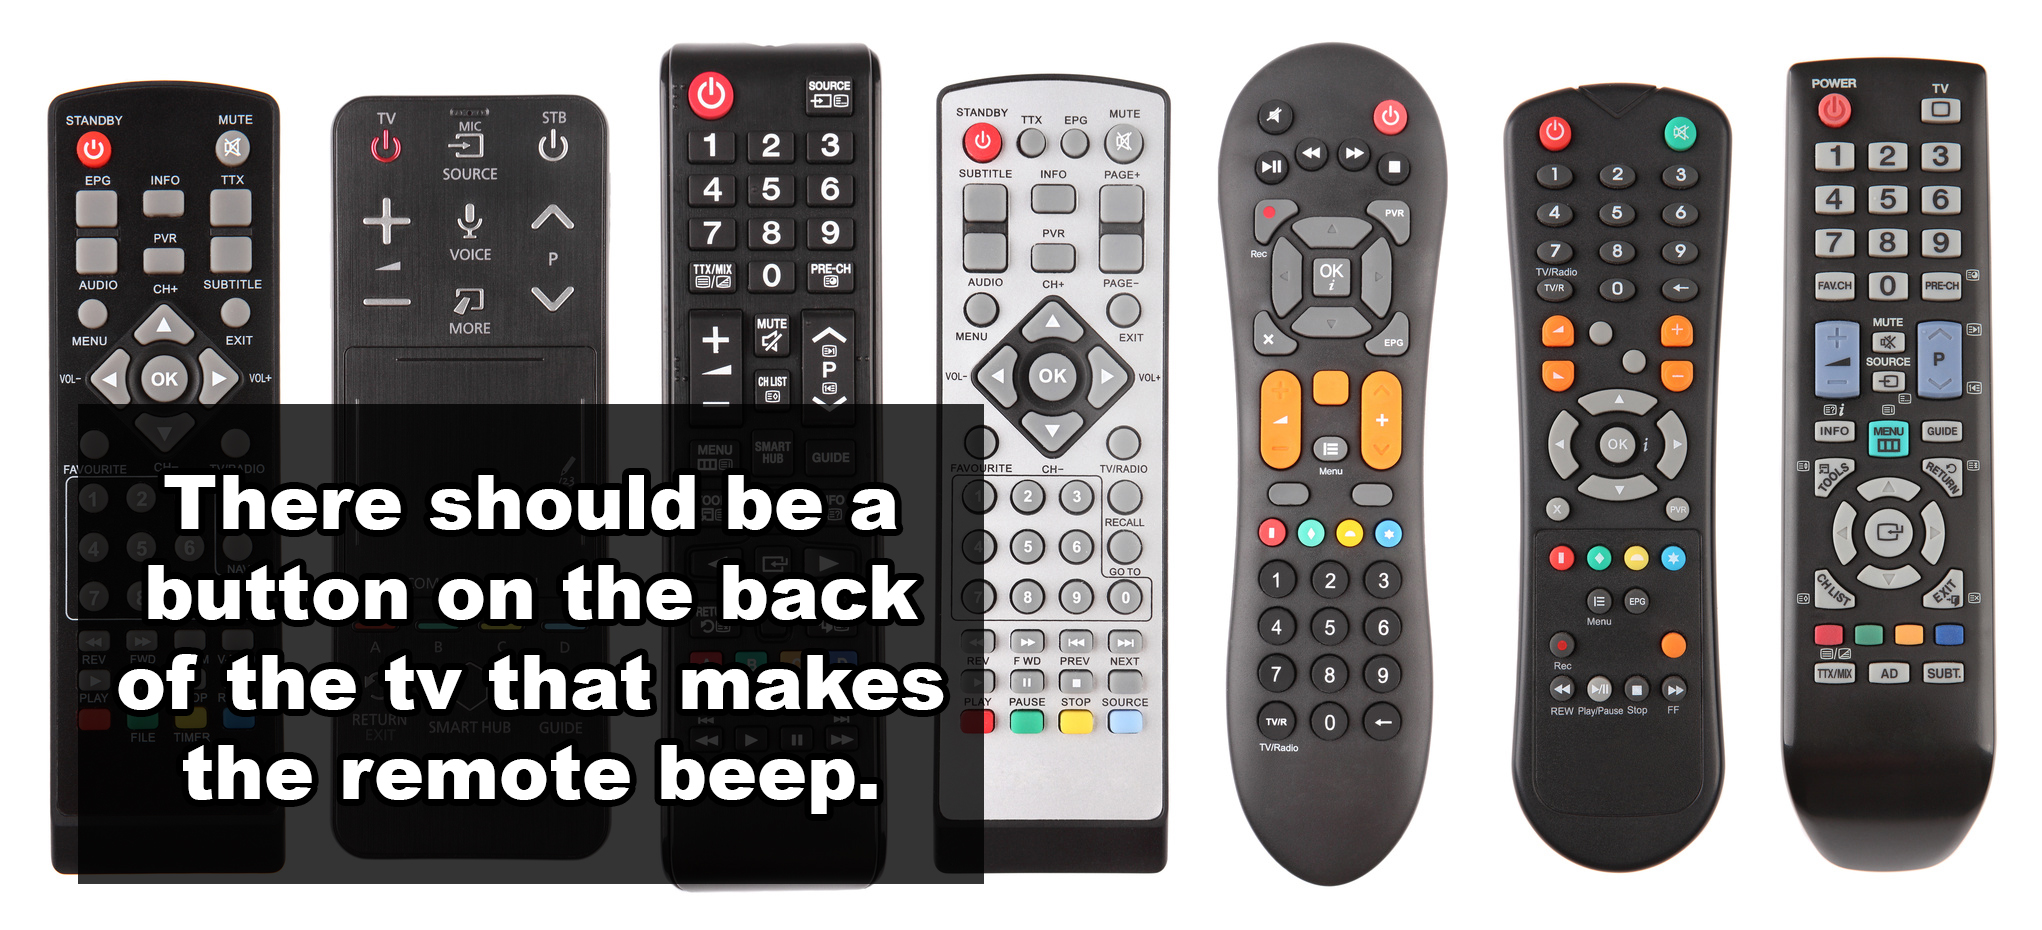 cable tv remotes - 0000 2 30Ig Ne Ow 2000 On ava There should be a pooo button on the back of the tv that makes the remote beep. Jovac O A Olo olo 000 Didic Llc